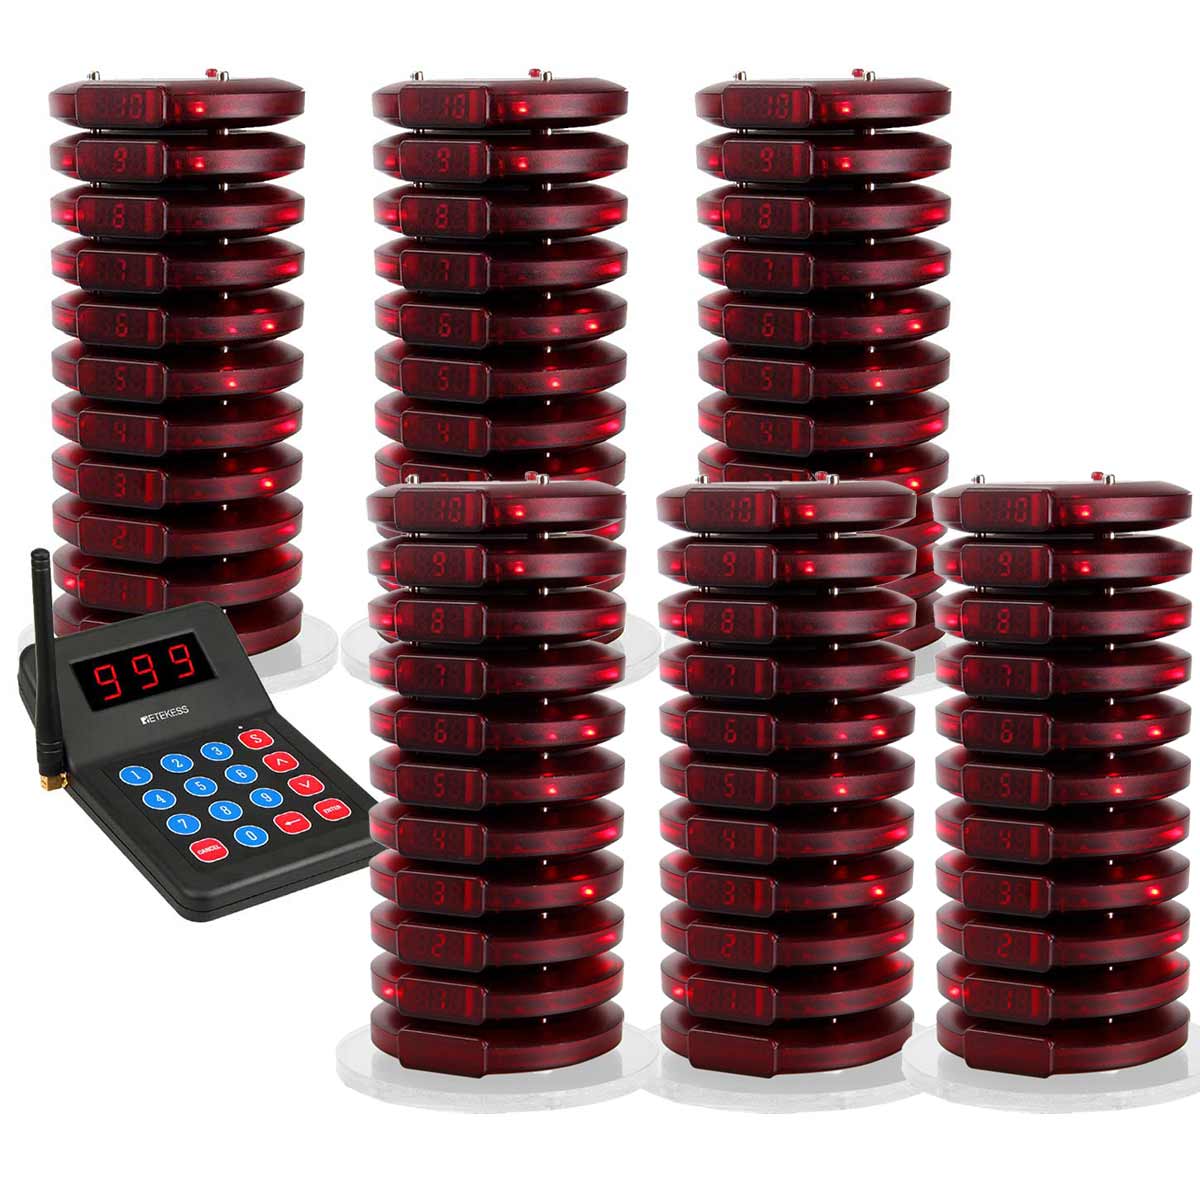 Retekess T119 Restaurant Pager System 1 Keypad 60 Pagers